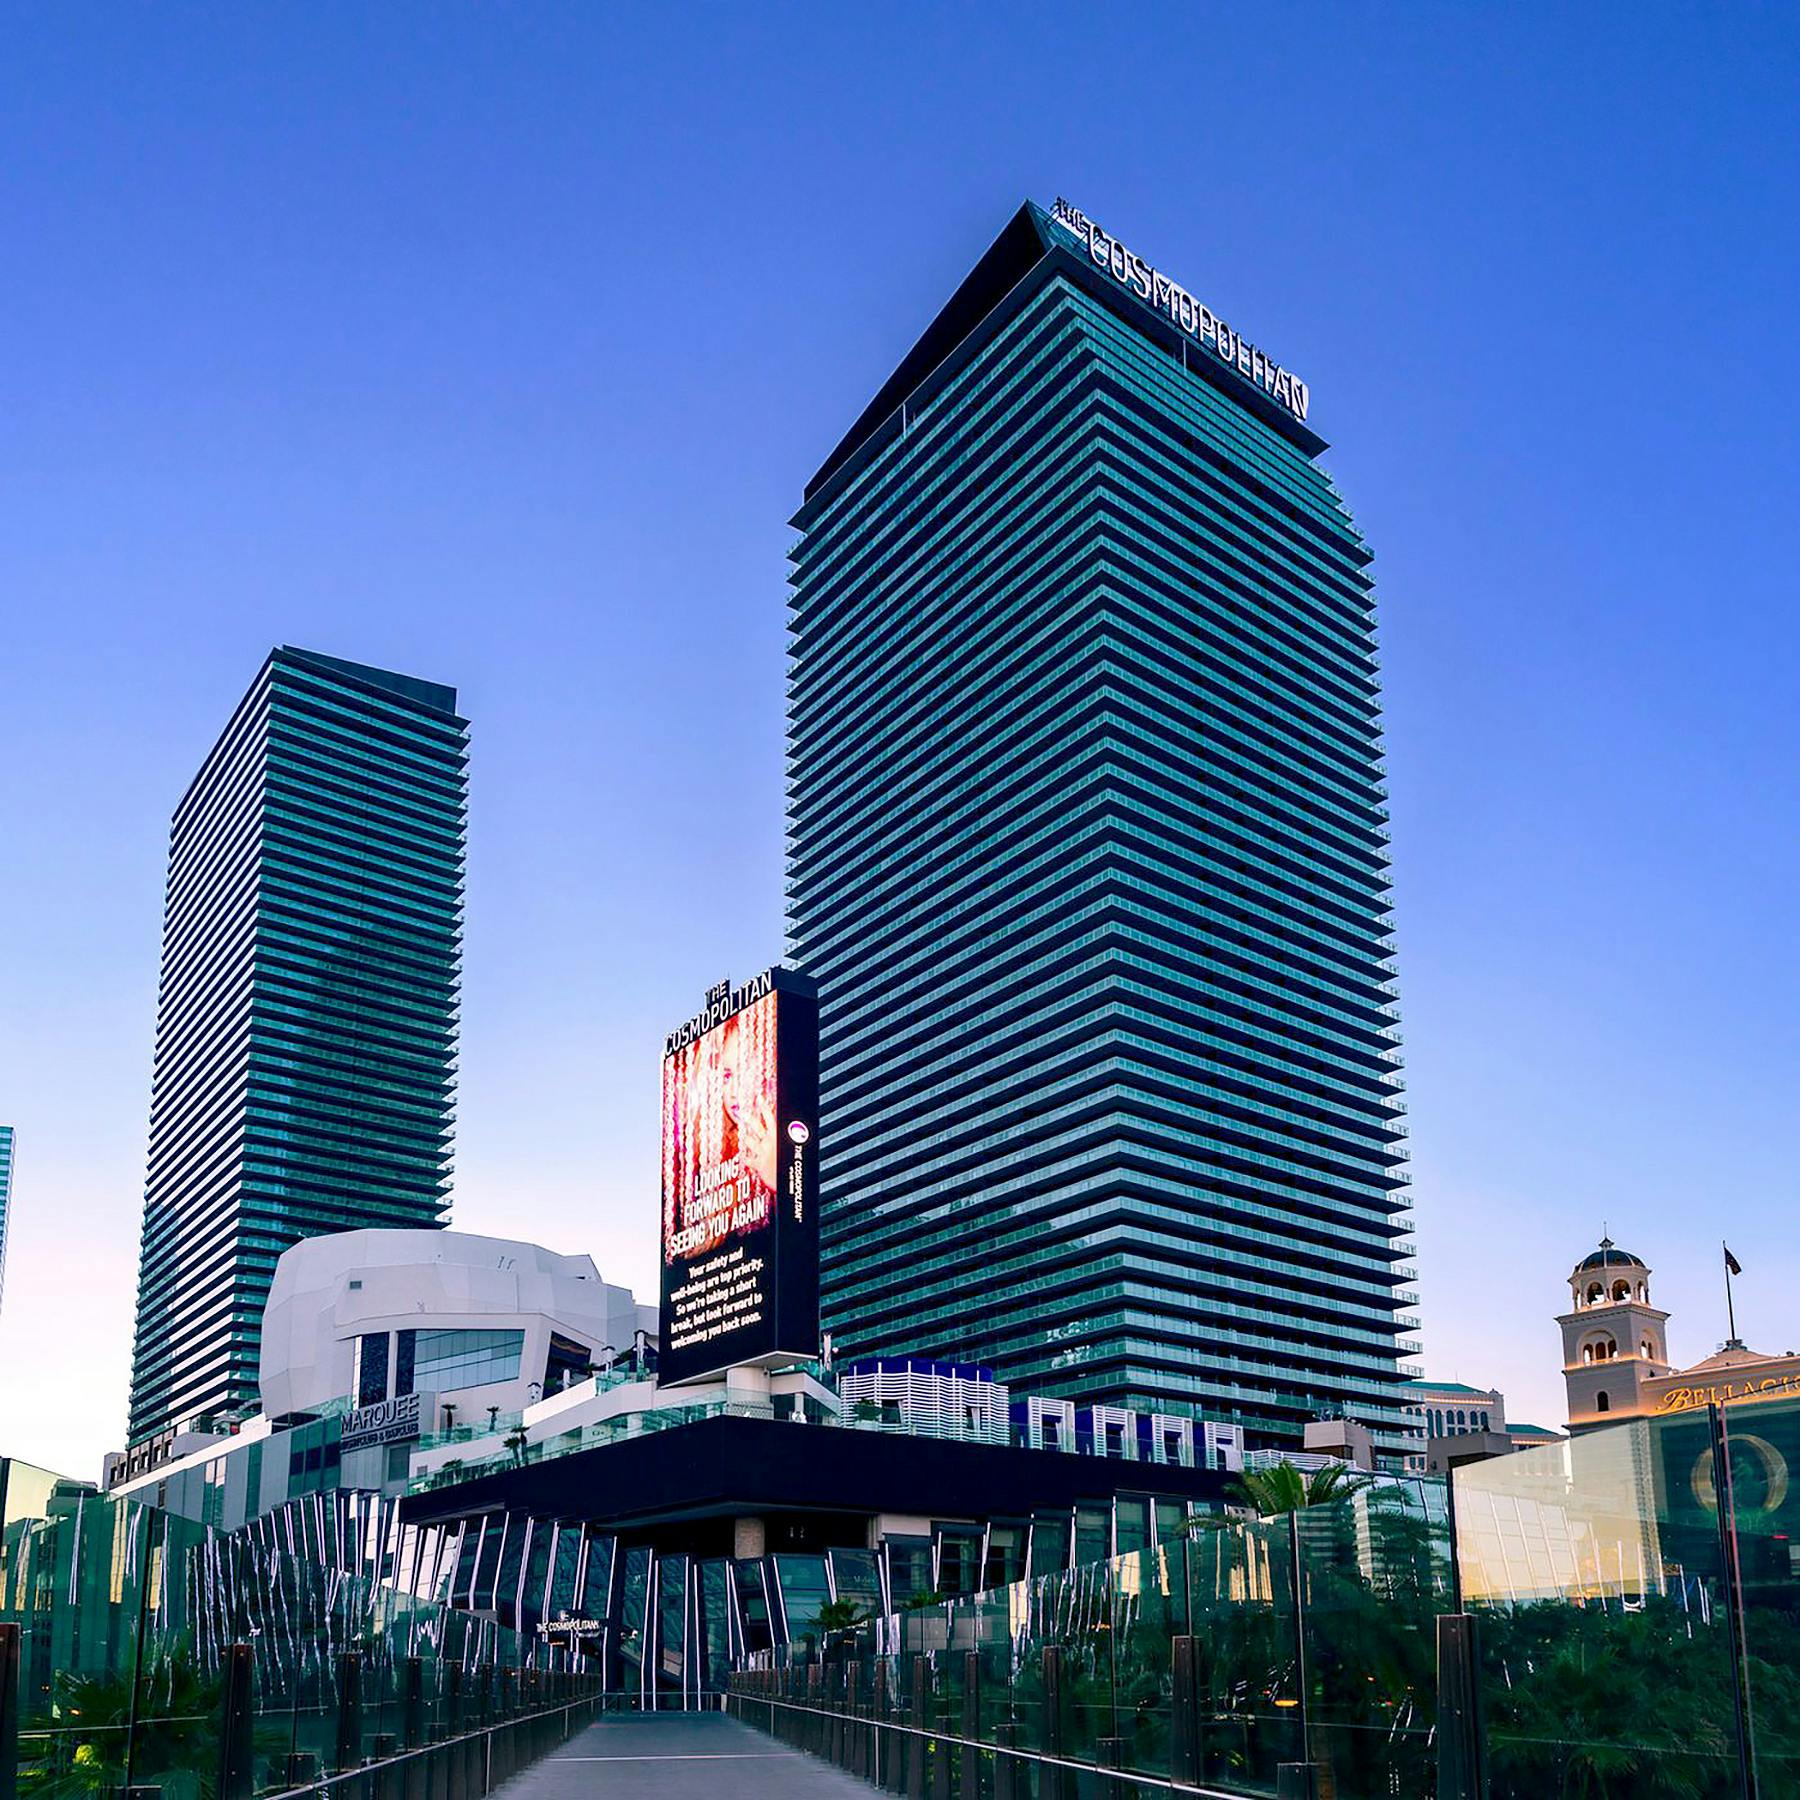 Blackstone Hit the Jackpot in a $5.7 Billion Deal to Sell The Cosmopolitan